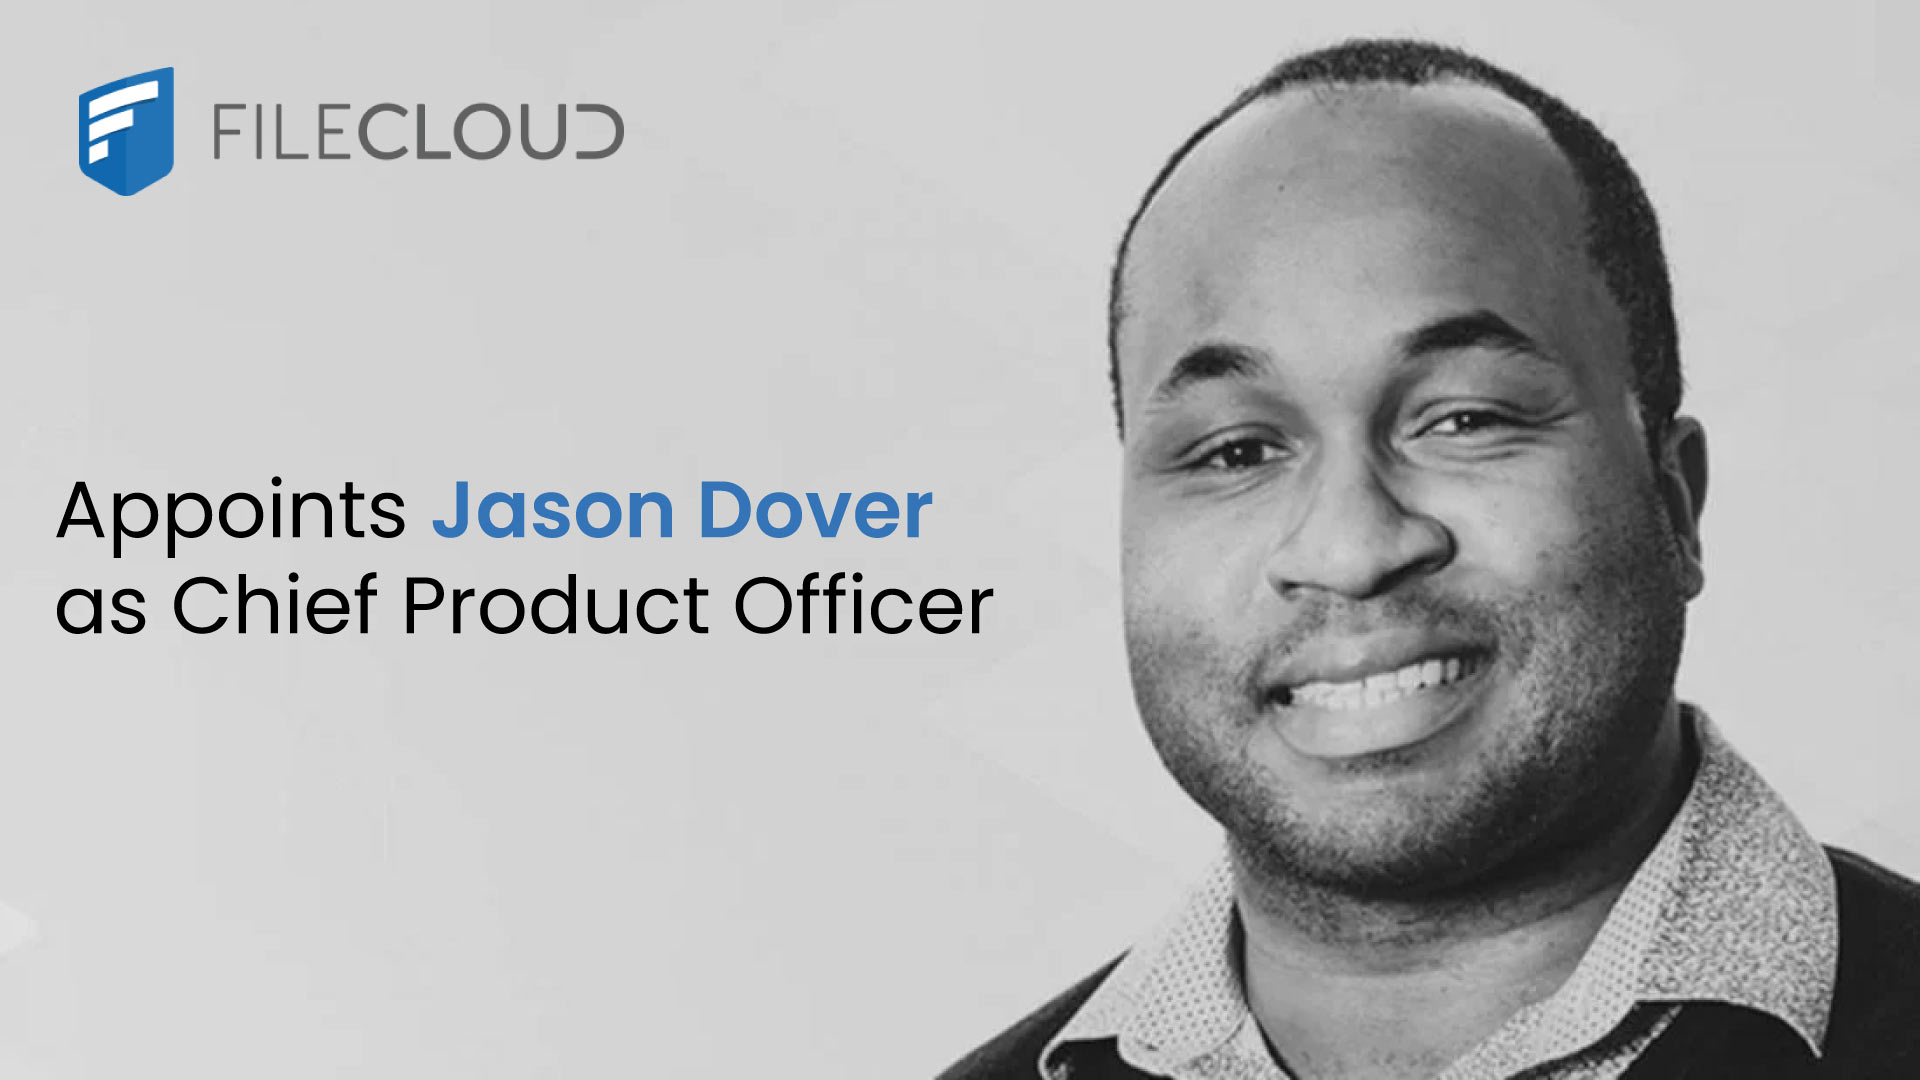 FileCloud Appoints Jason Dover as Chief Product Officer to Lead Product Strategy & Market Expansion